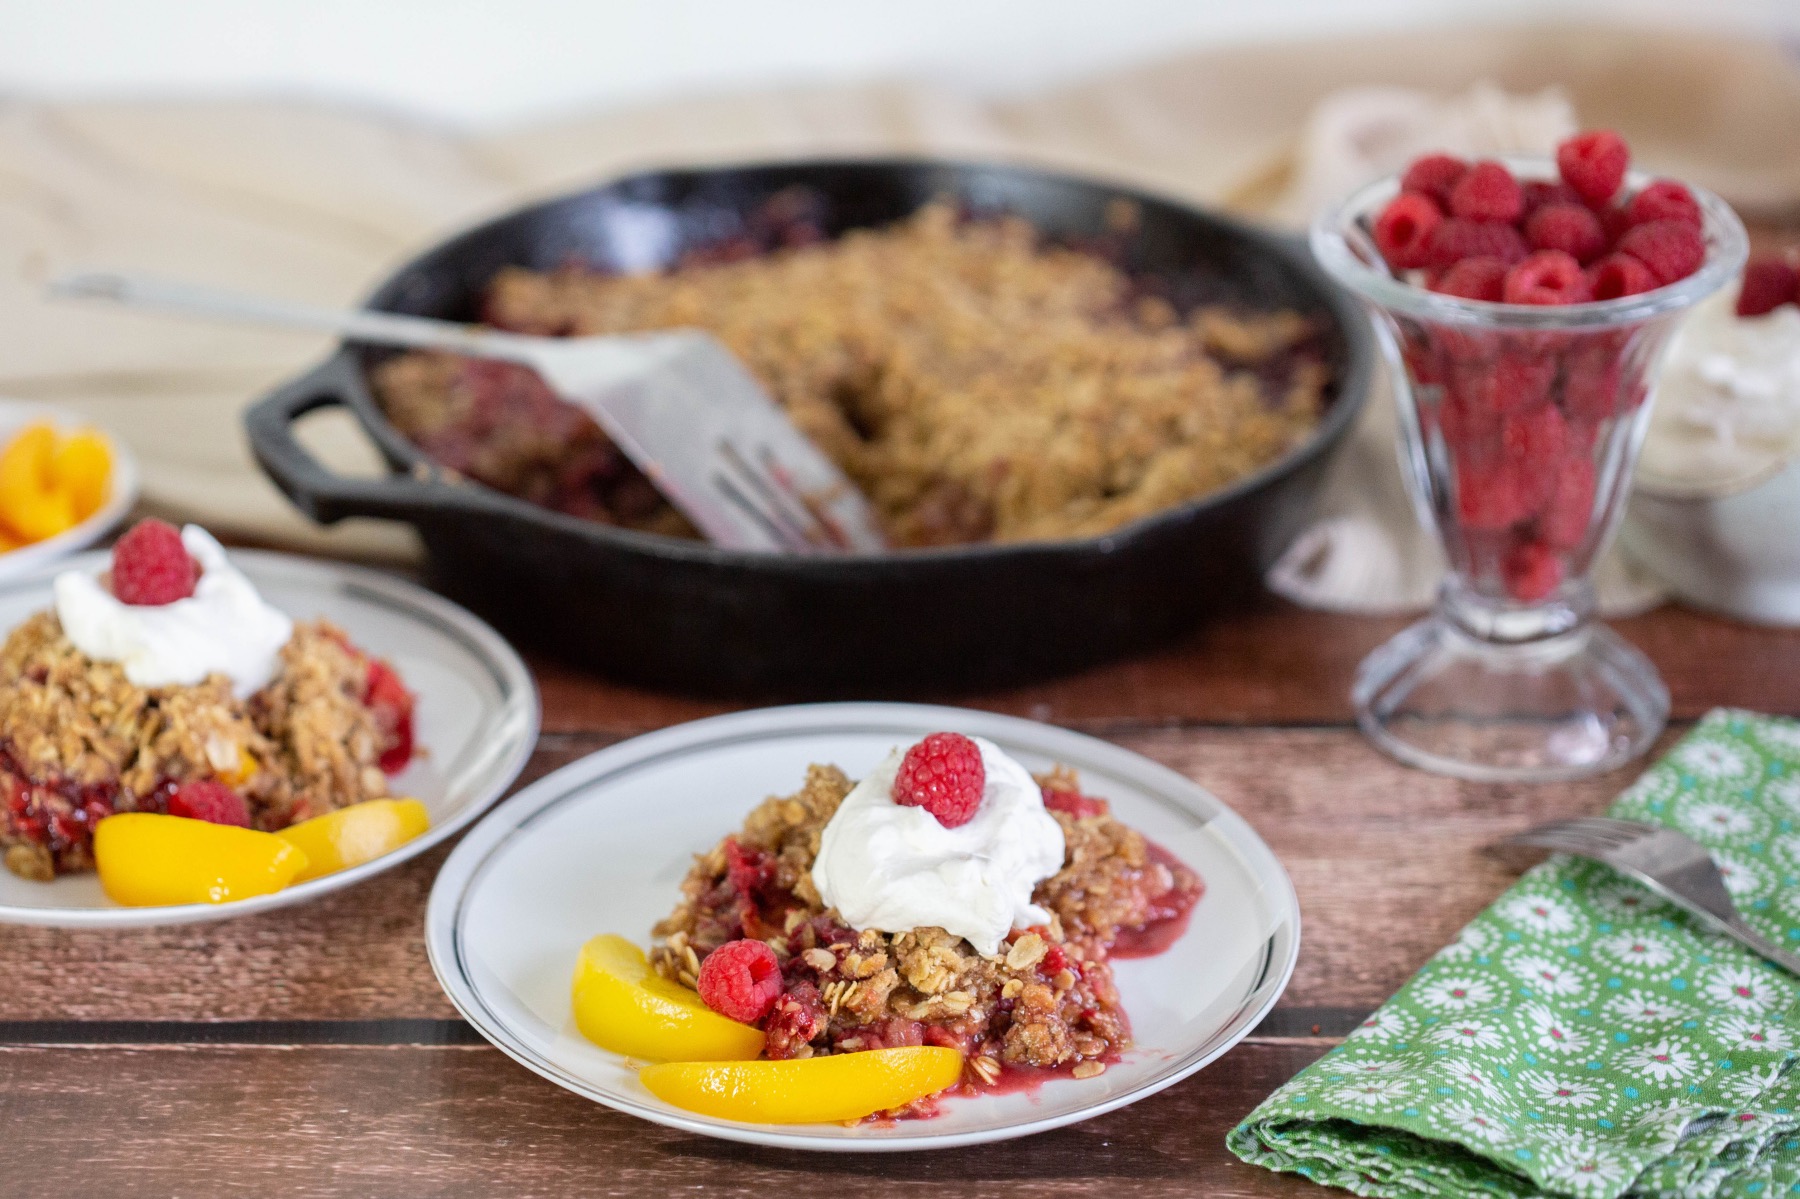 serve the peach crumble with whipped cream and raspberries